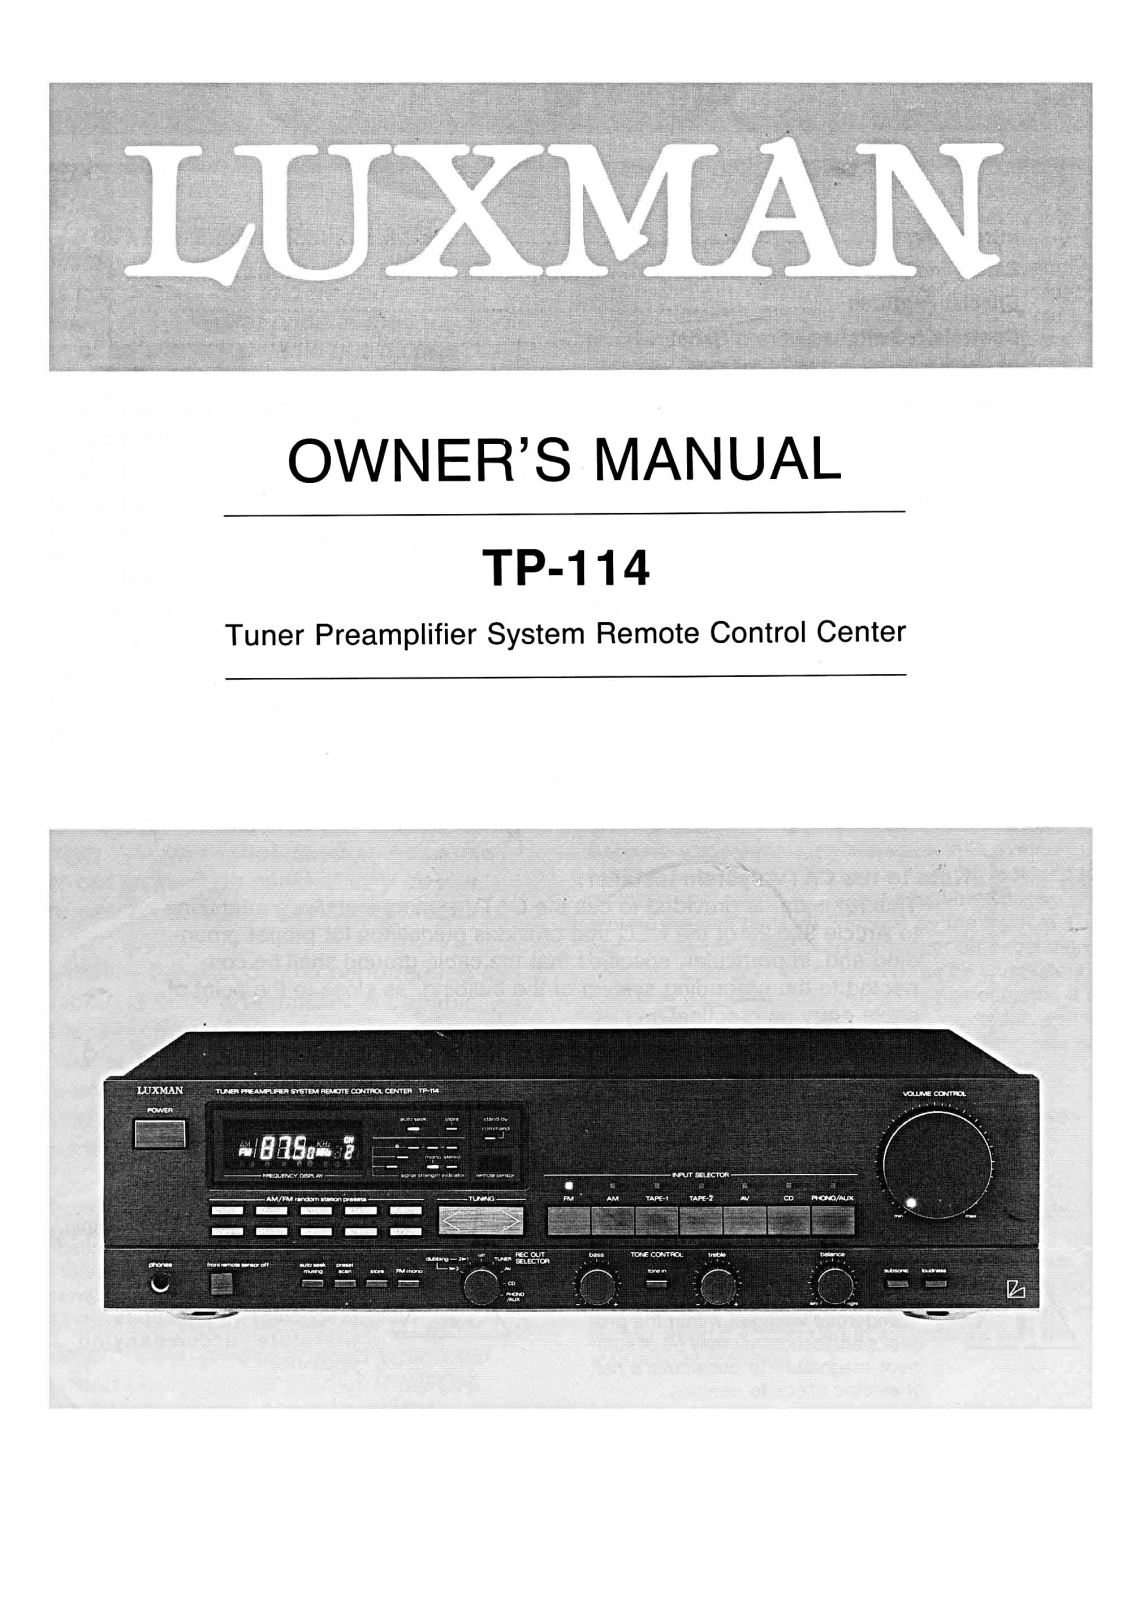 Luxman TP-114 Owners Manual